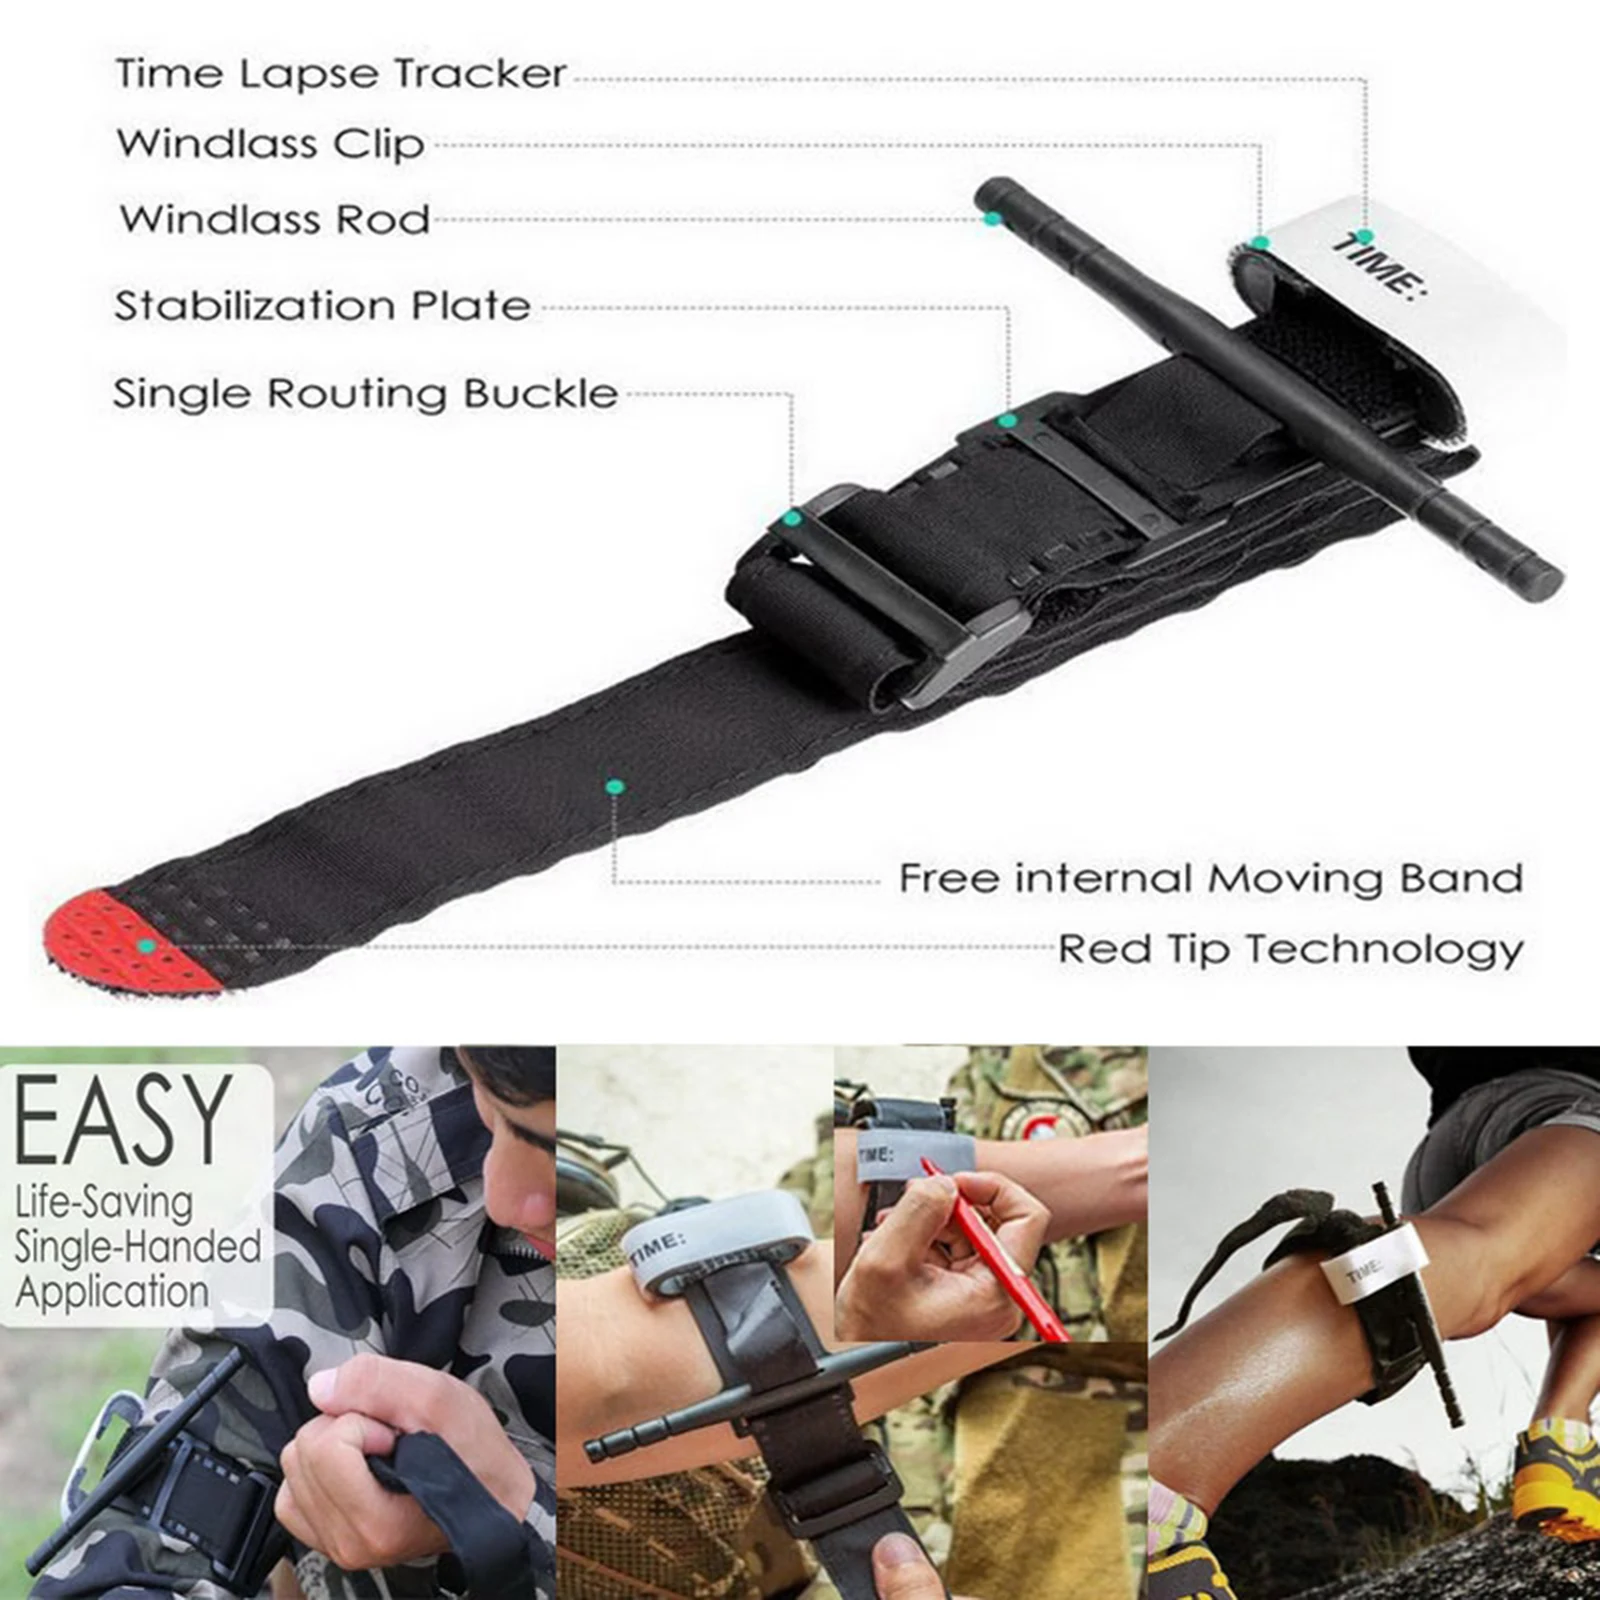 Portable Tourniquet One-Handed Combat Application Outdoor First Aids for Hiking